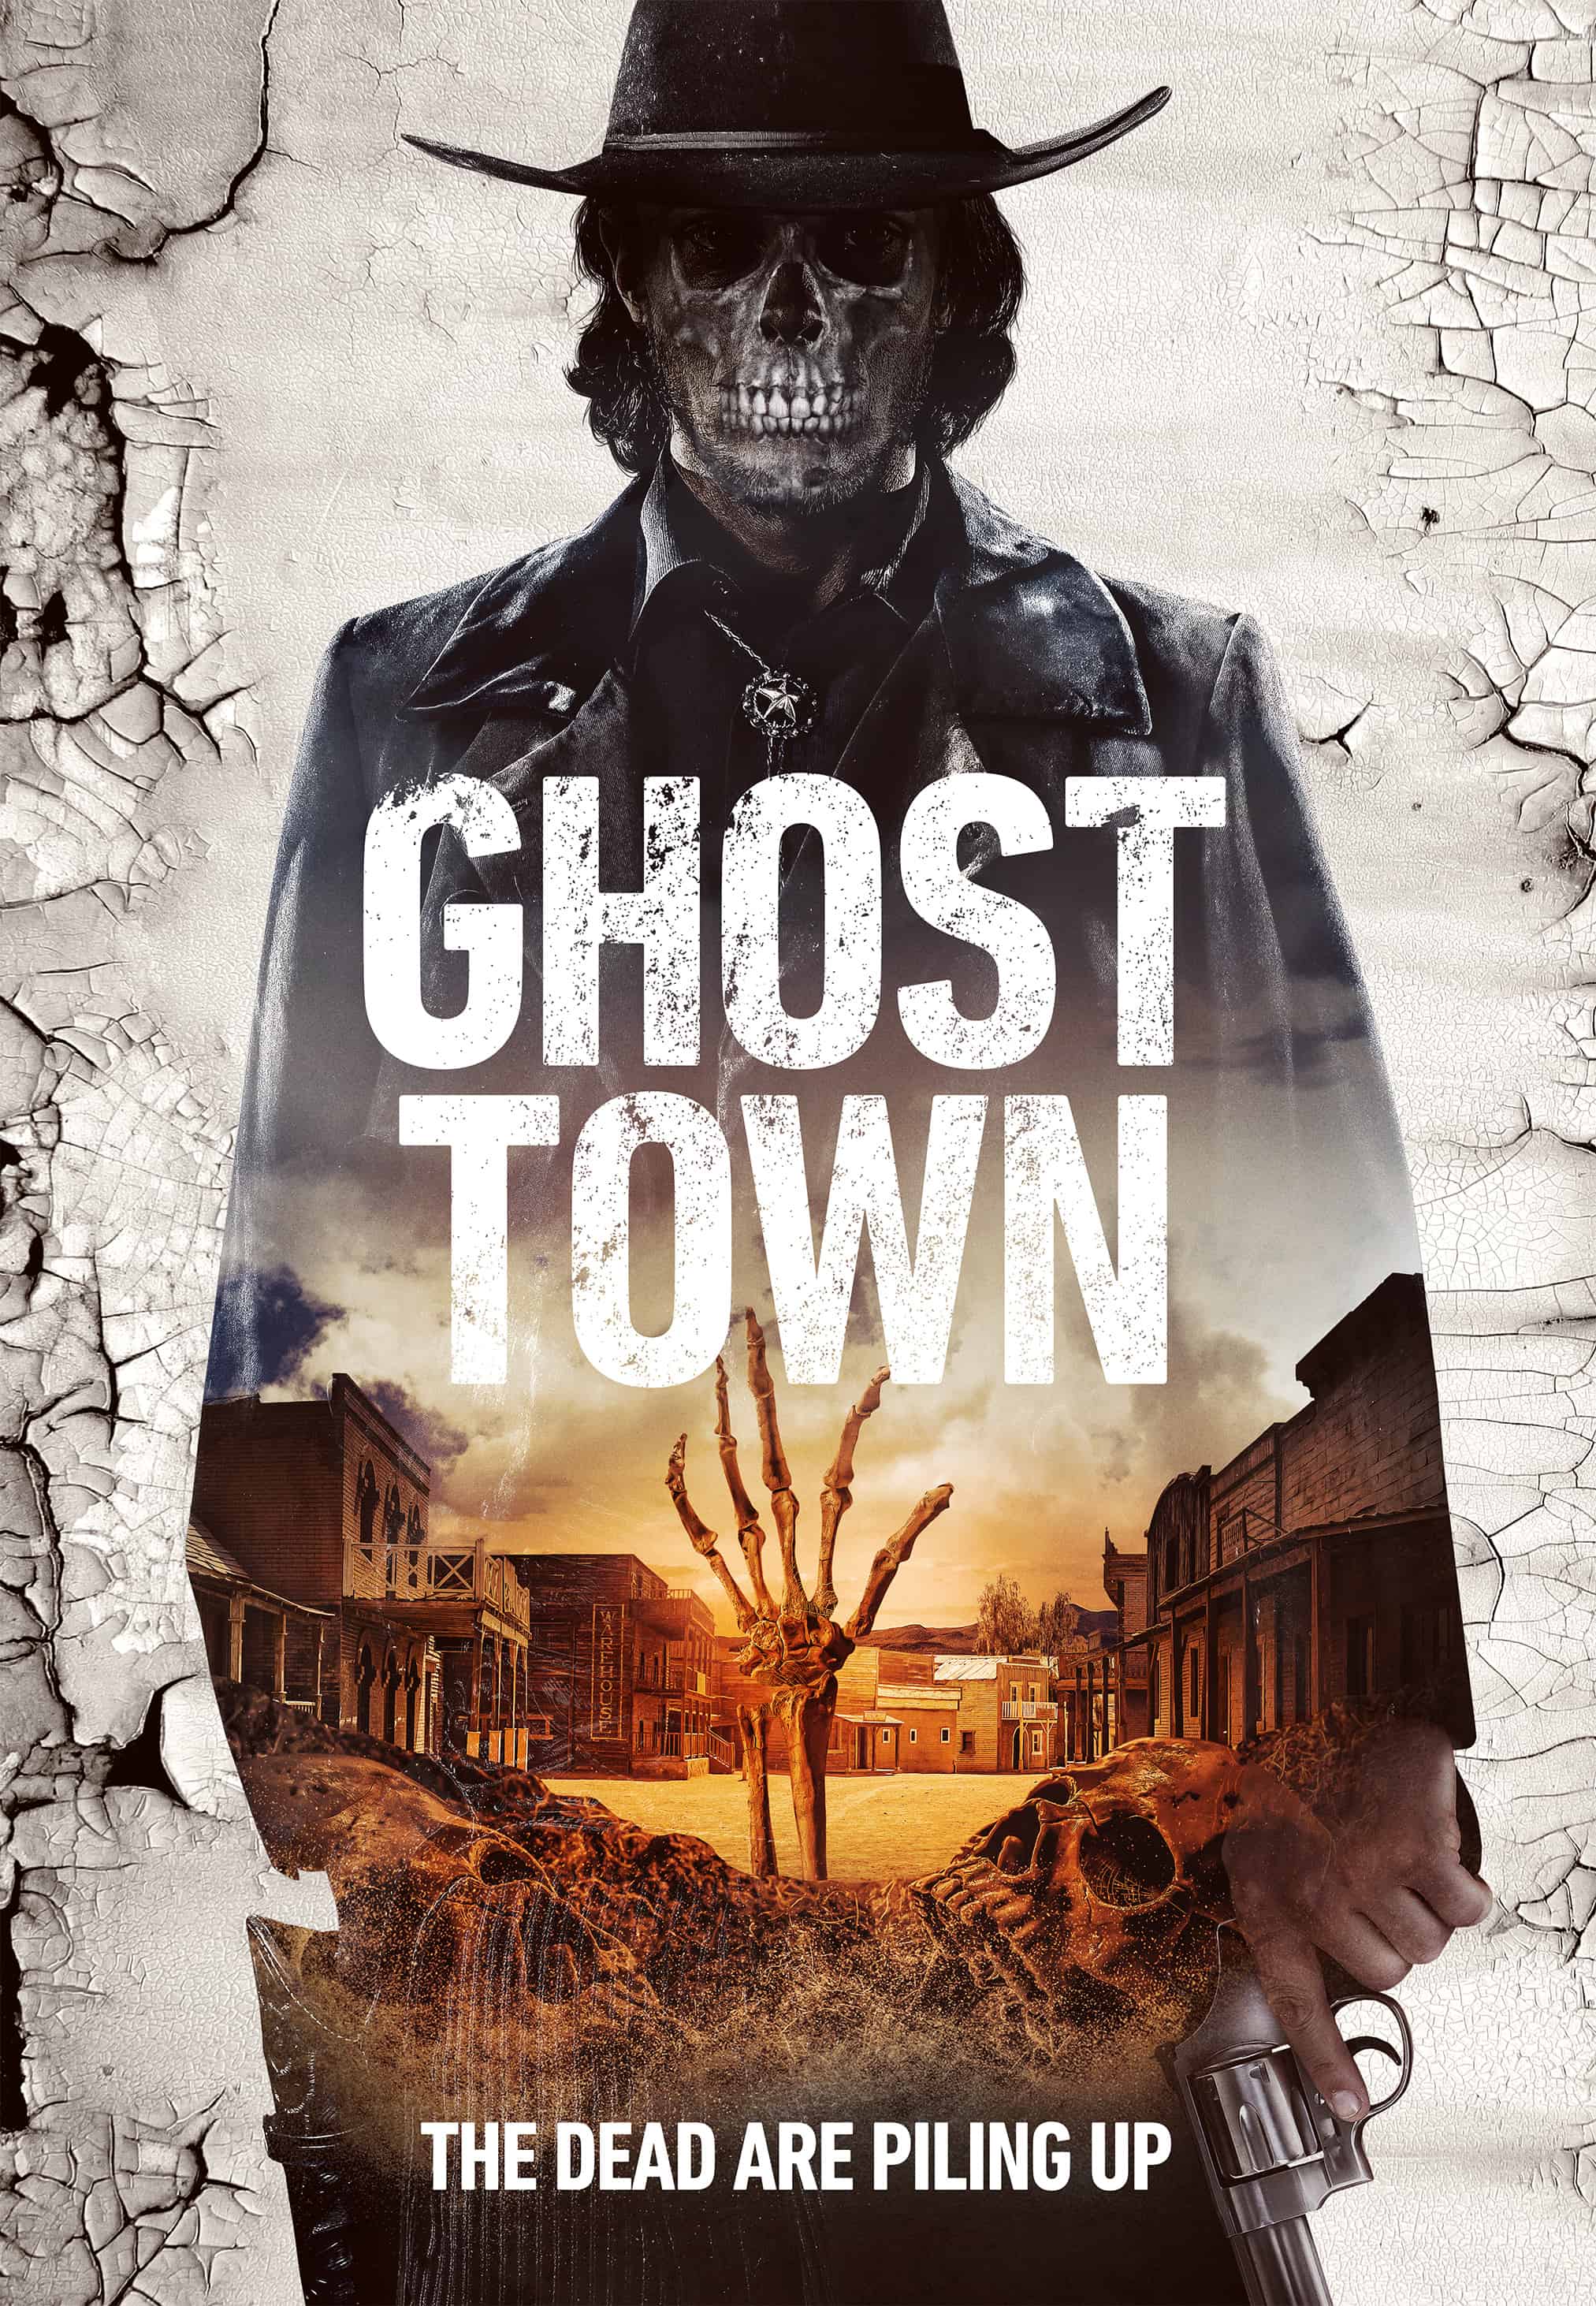 Ghost Town offers up a poster and trailer arrives March 7th 11